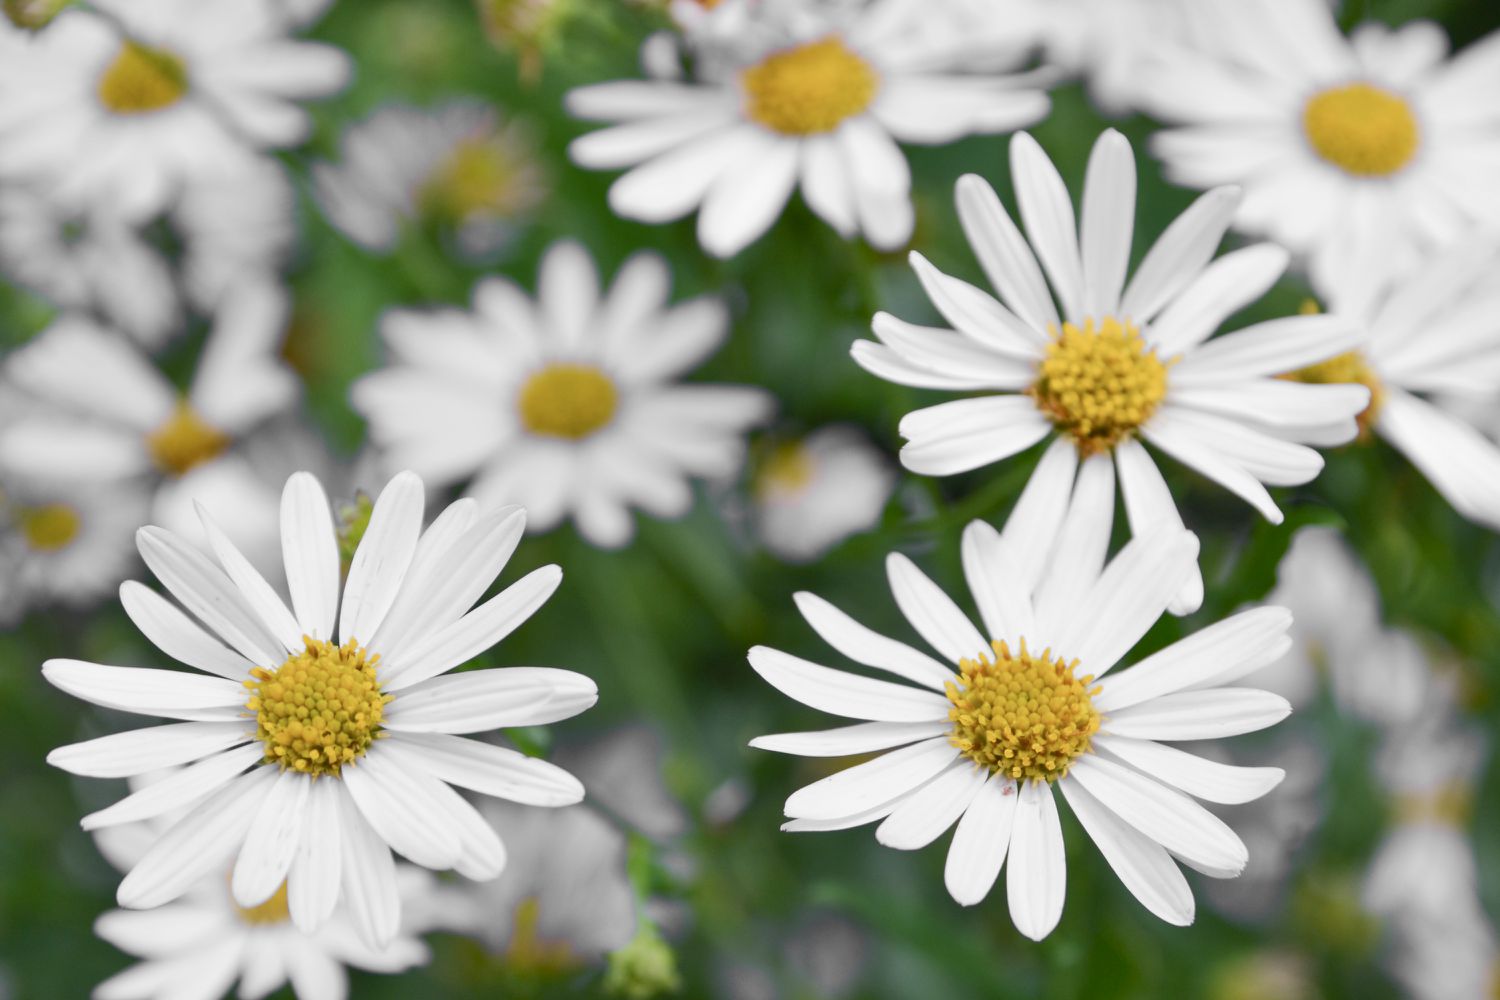 Mexican fleabane flowers with white daisy-like petals and yellow pollen centers closeup